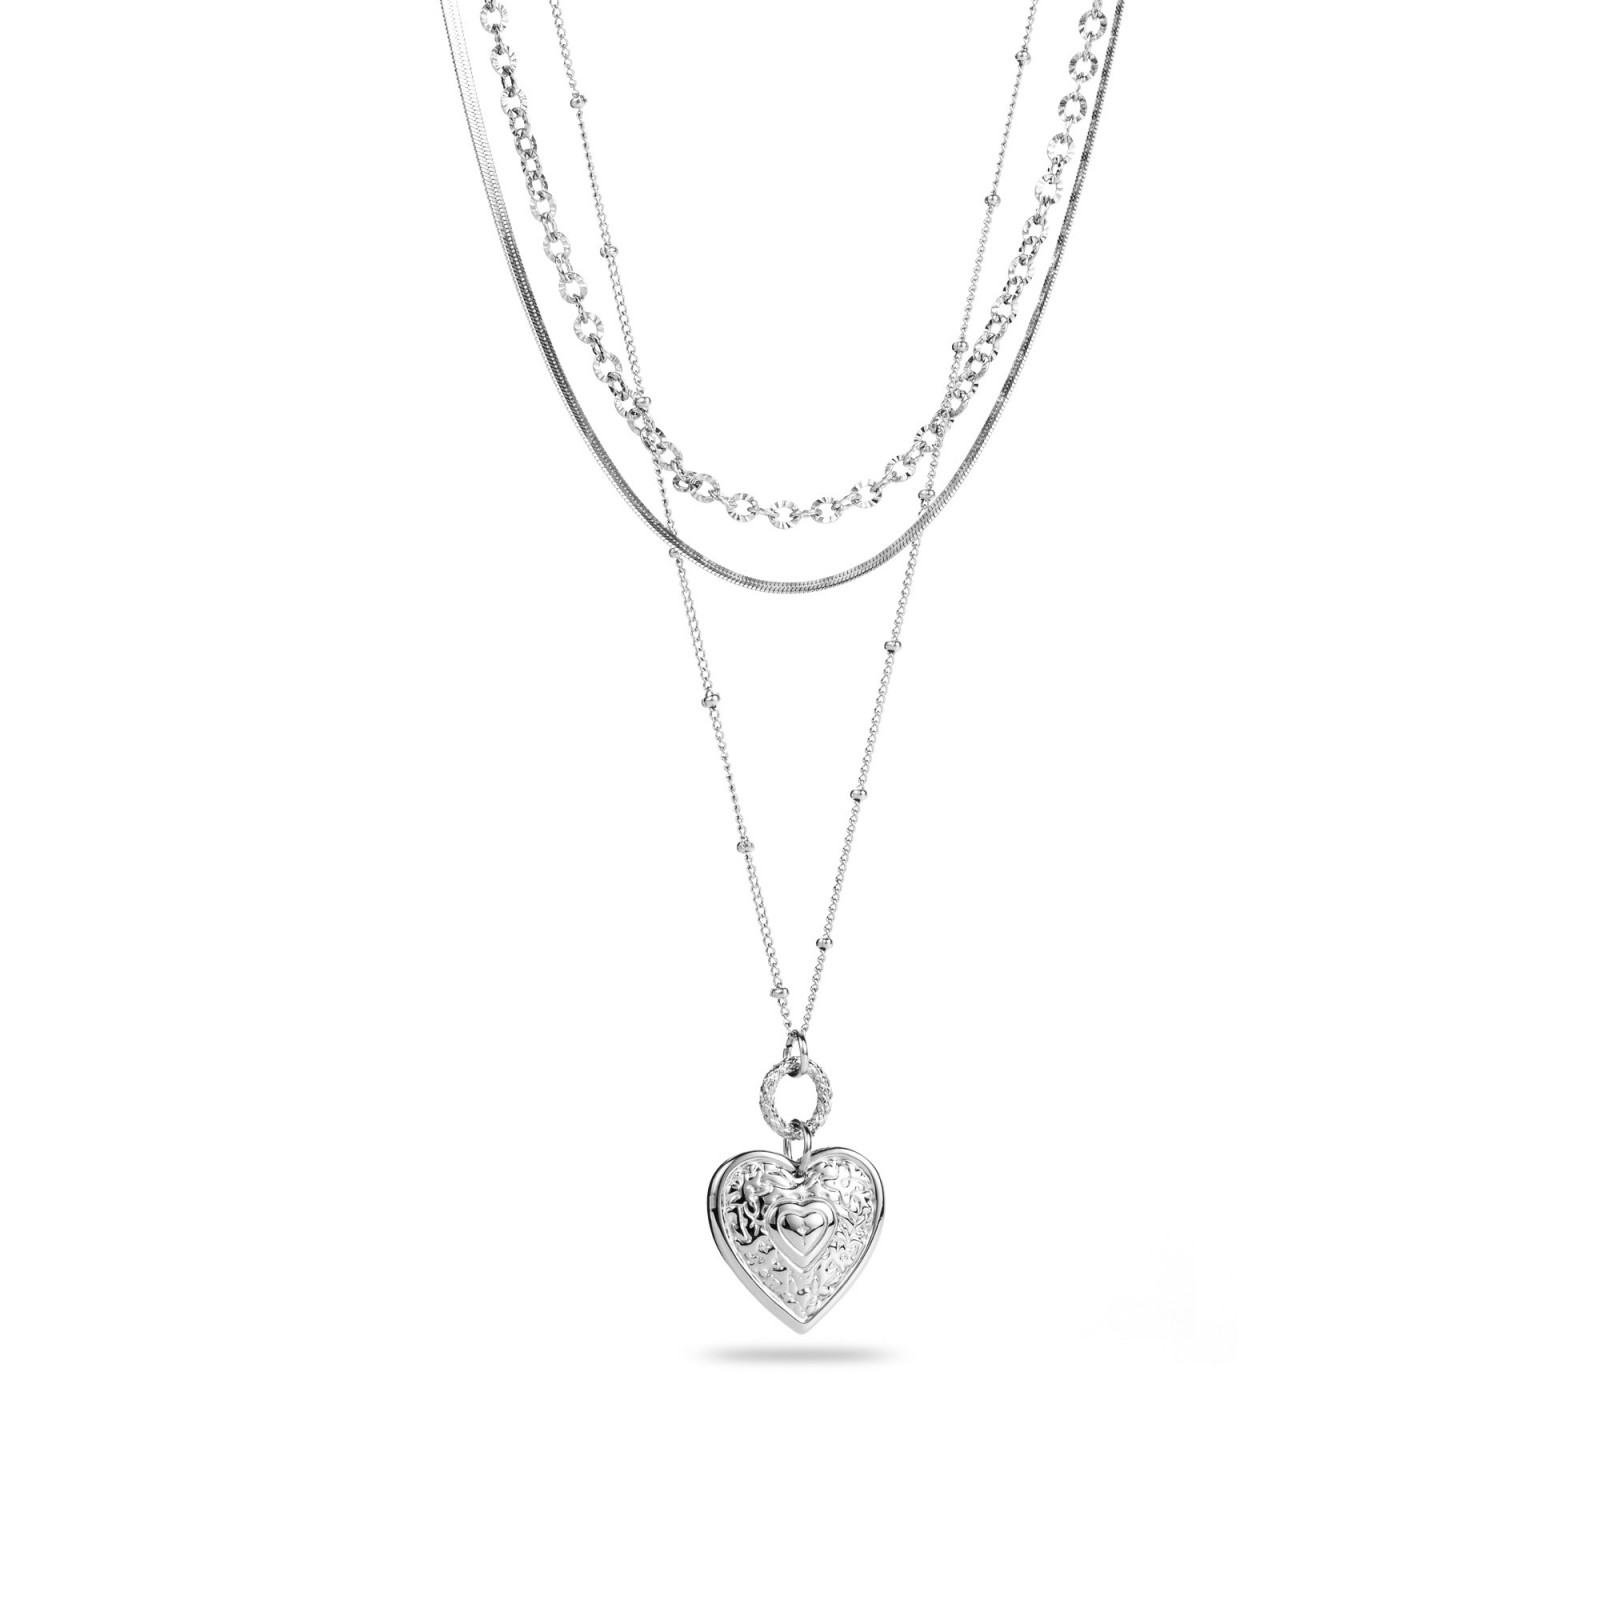 Multirang Necklace with Heart Pendant Color:Silver